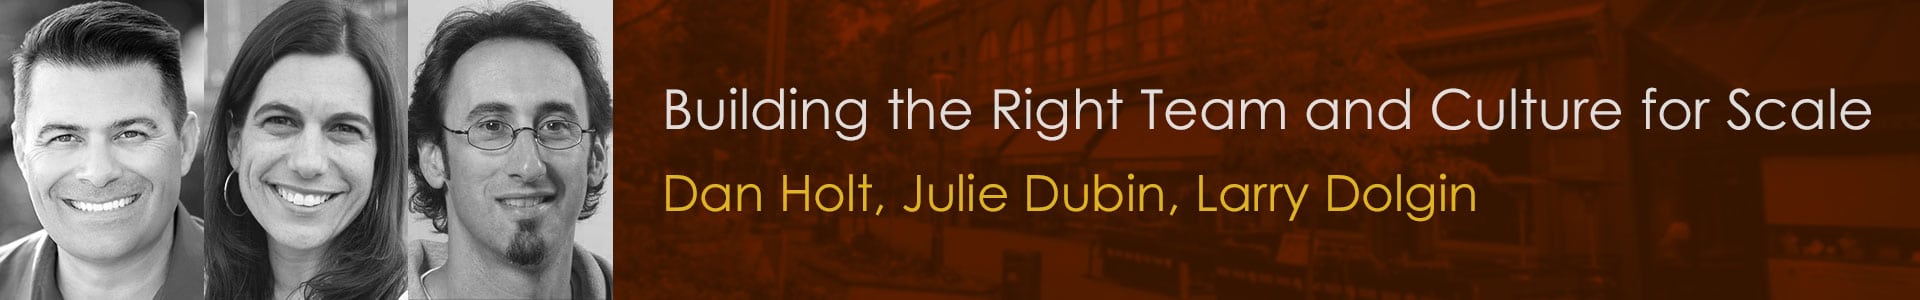 Learn how to build the right team and culture to scale from Dan Holt, Julie Dubin and Larry Dolgin.